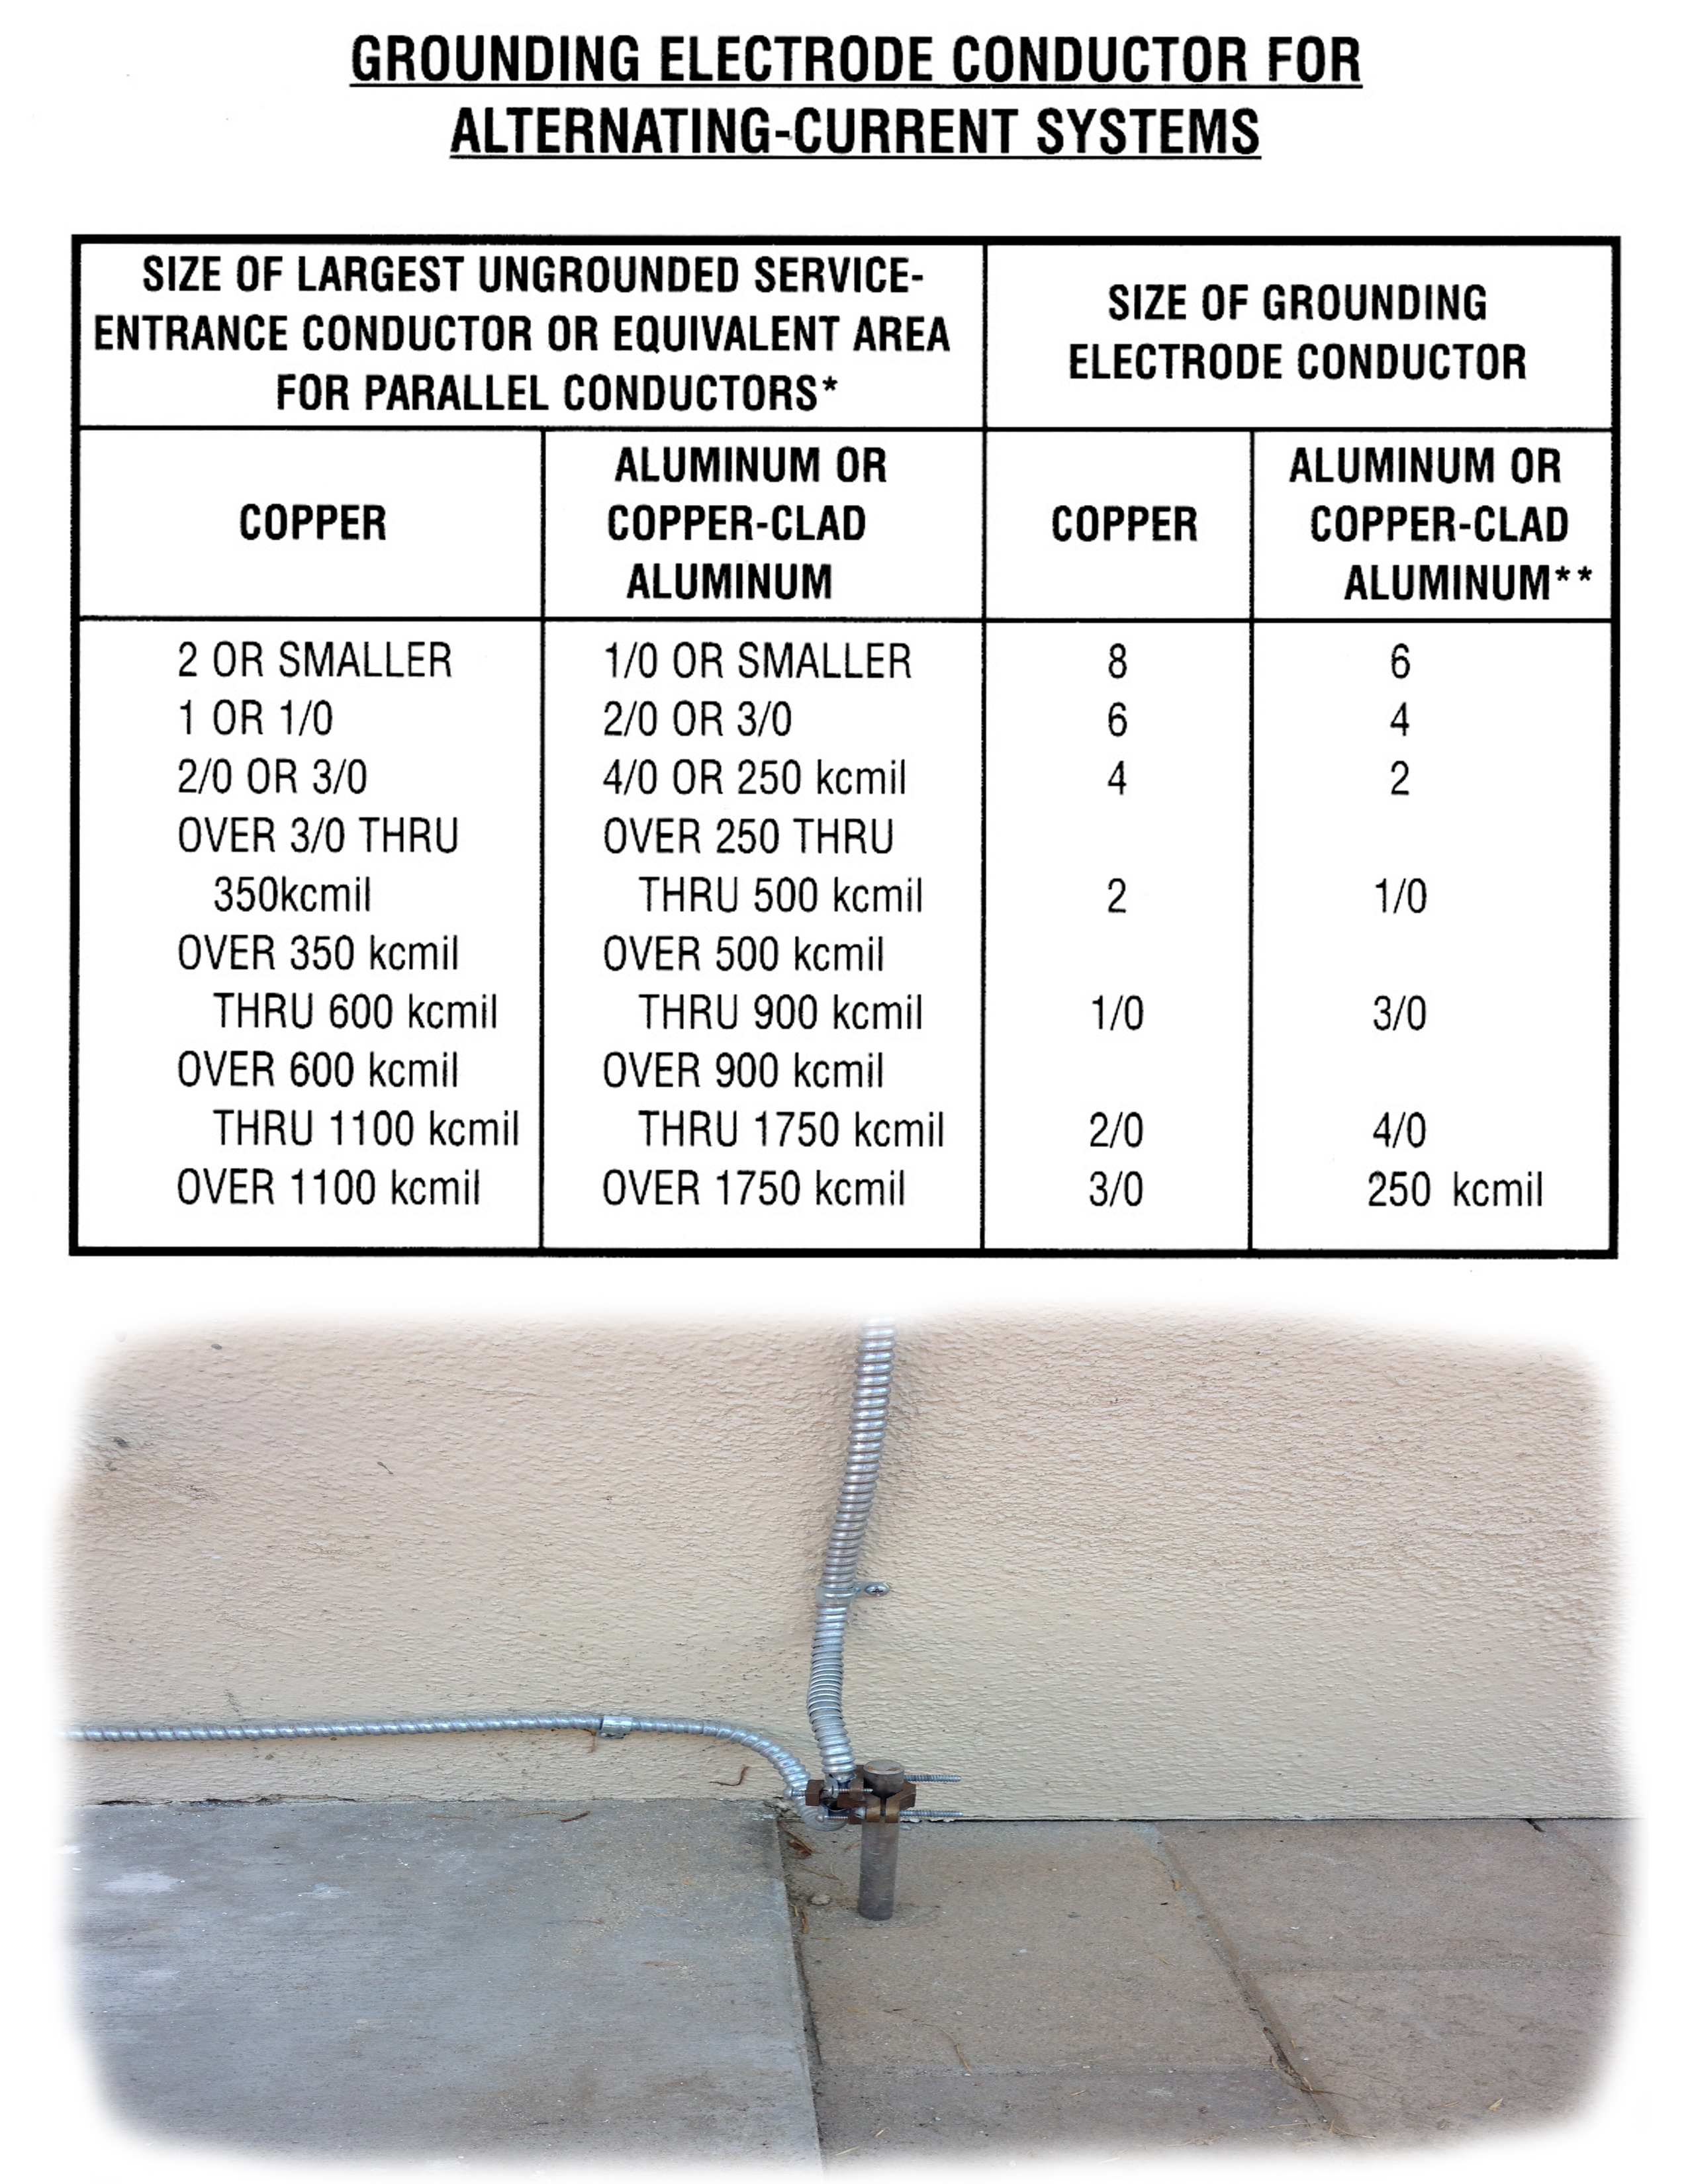 Grounding Electrode Conductor Size Chart: A Visual Reference of Charts ...